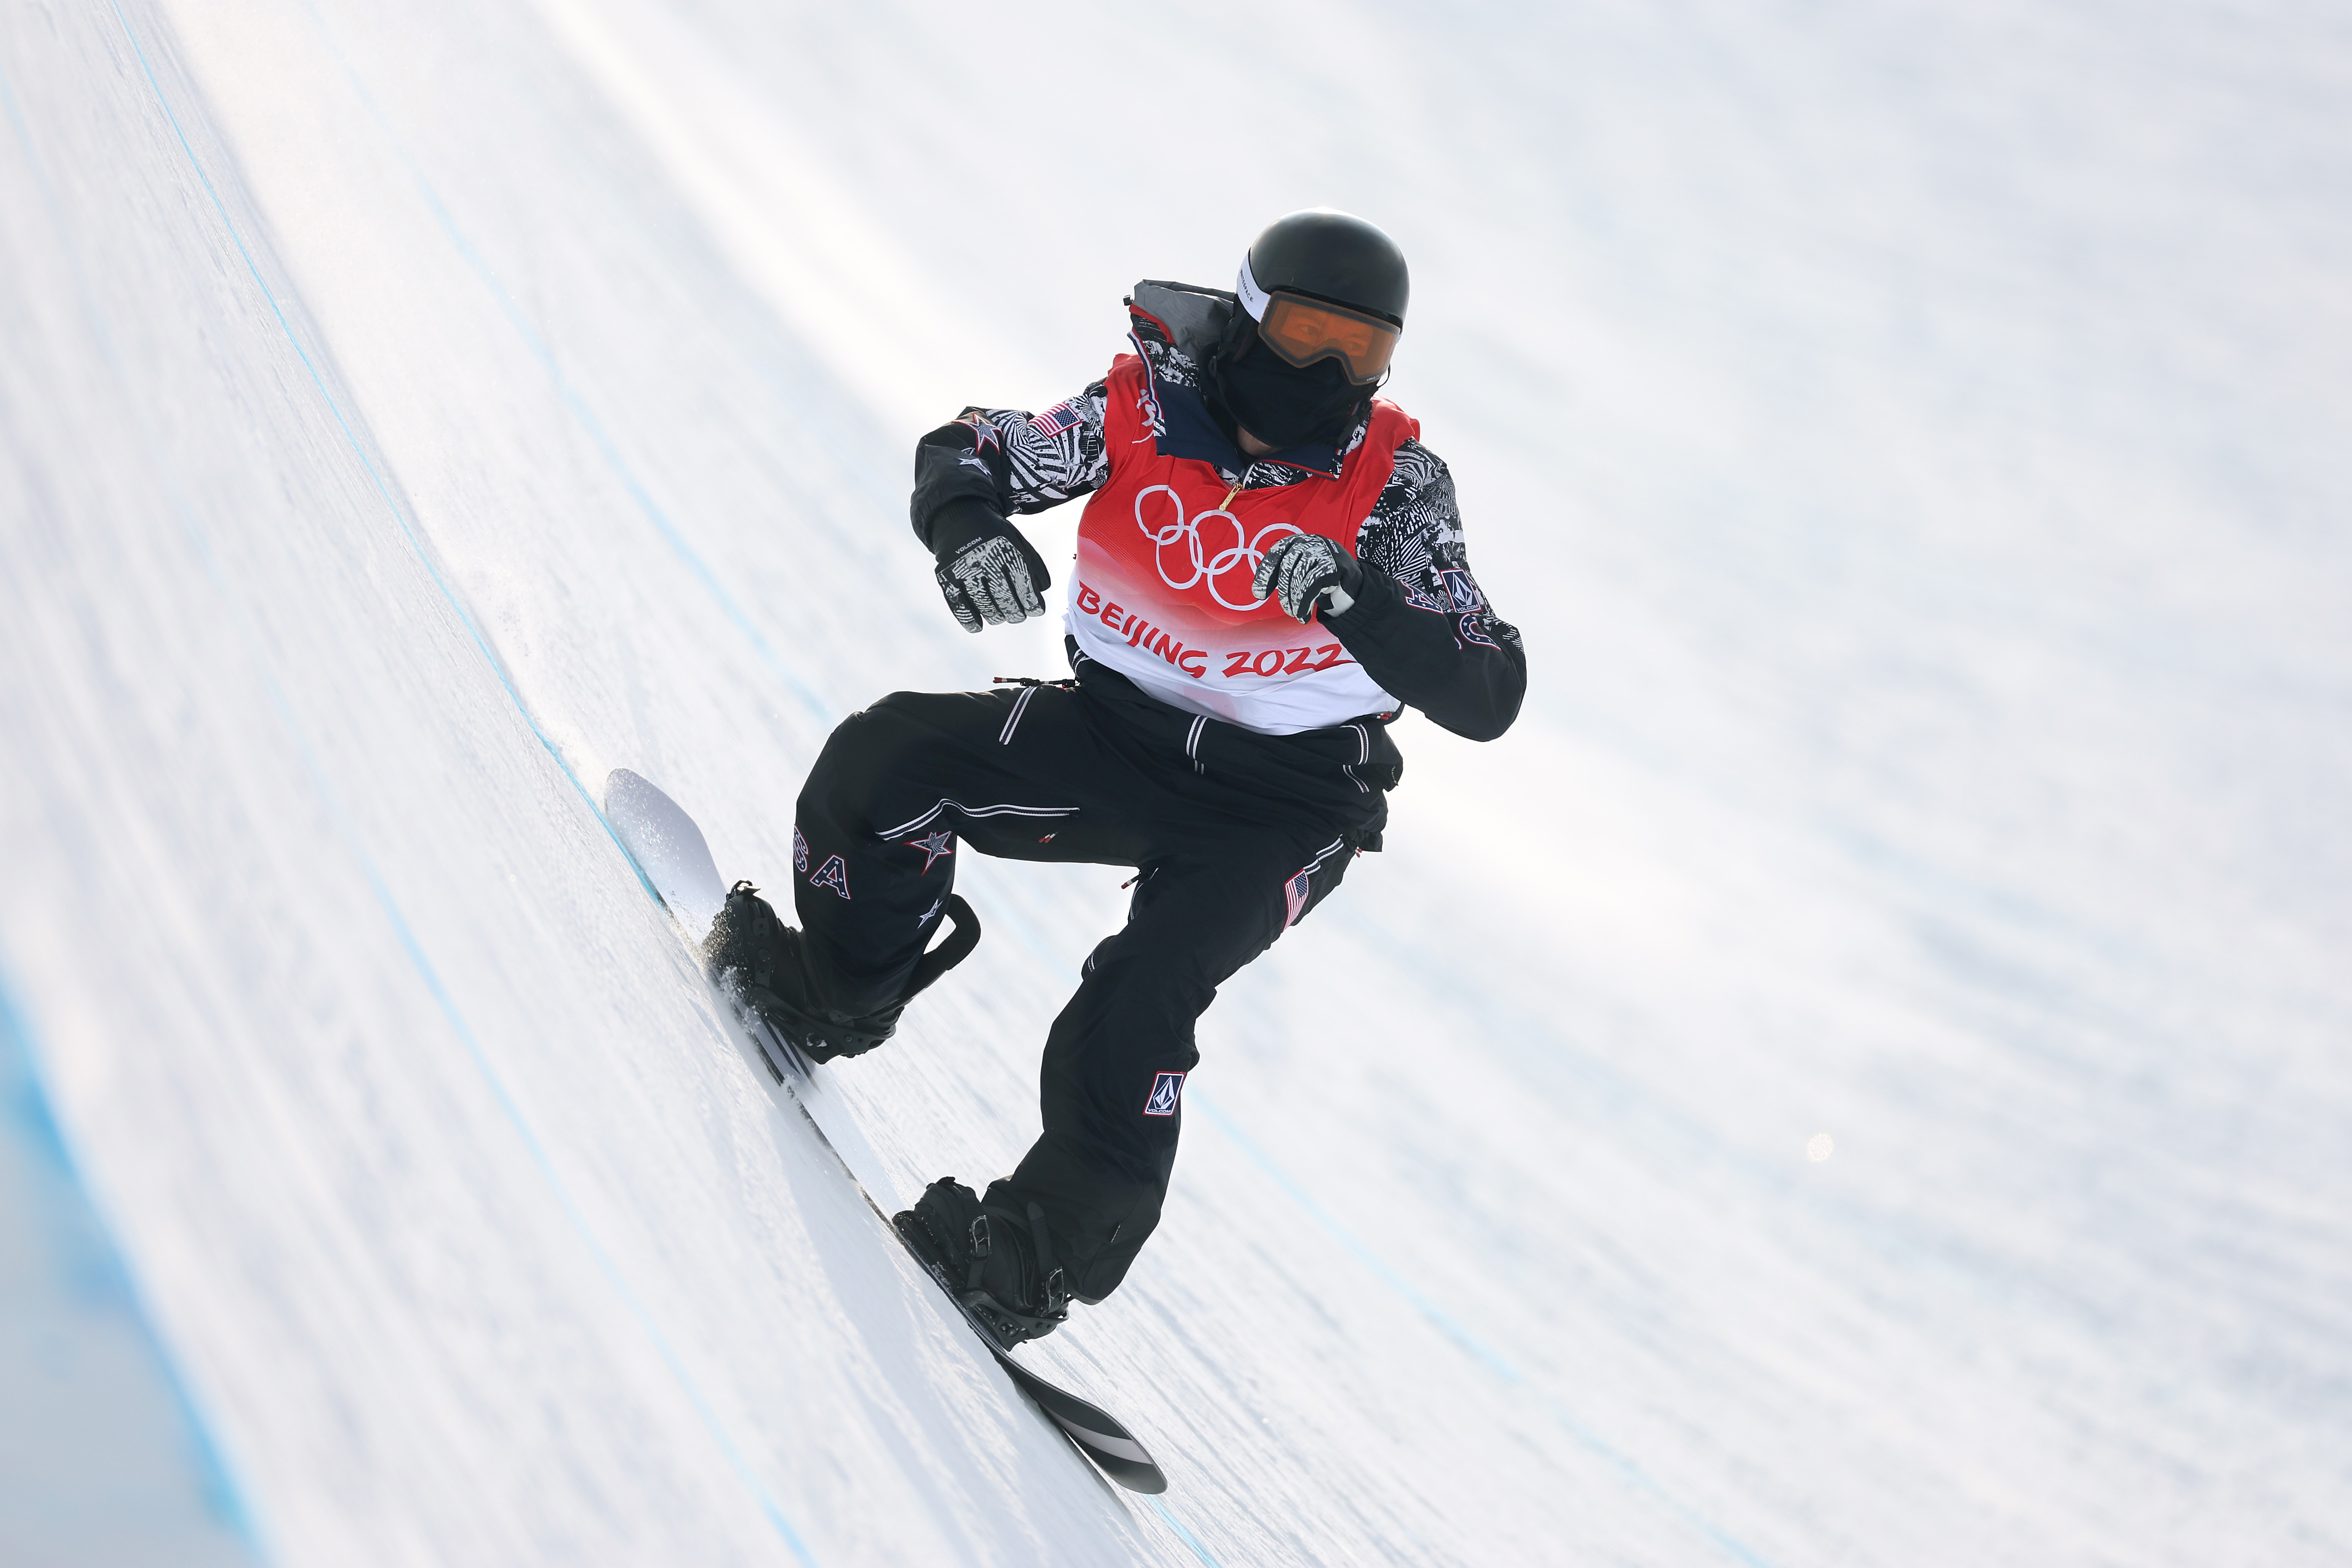 26) Shaun White keeps Olympic dream alive by qualifying for